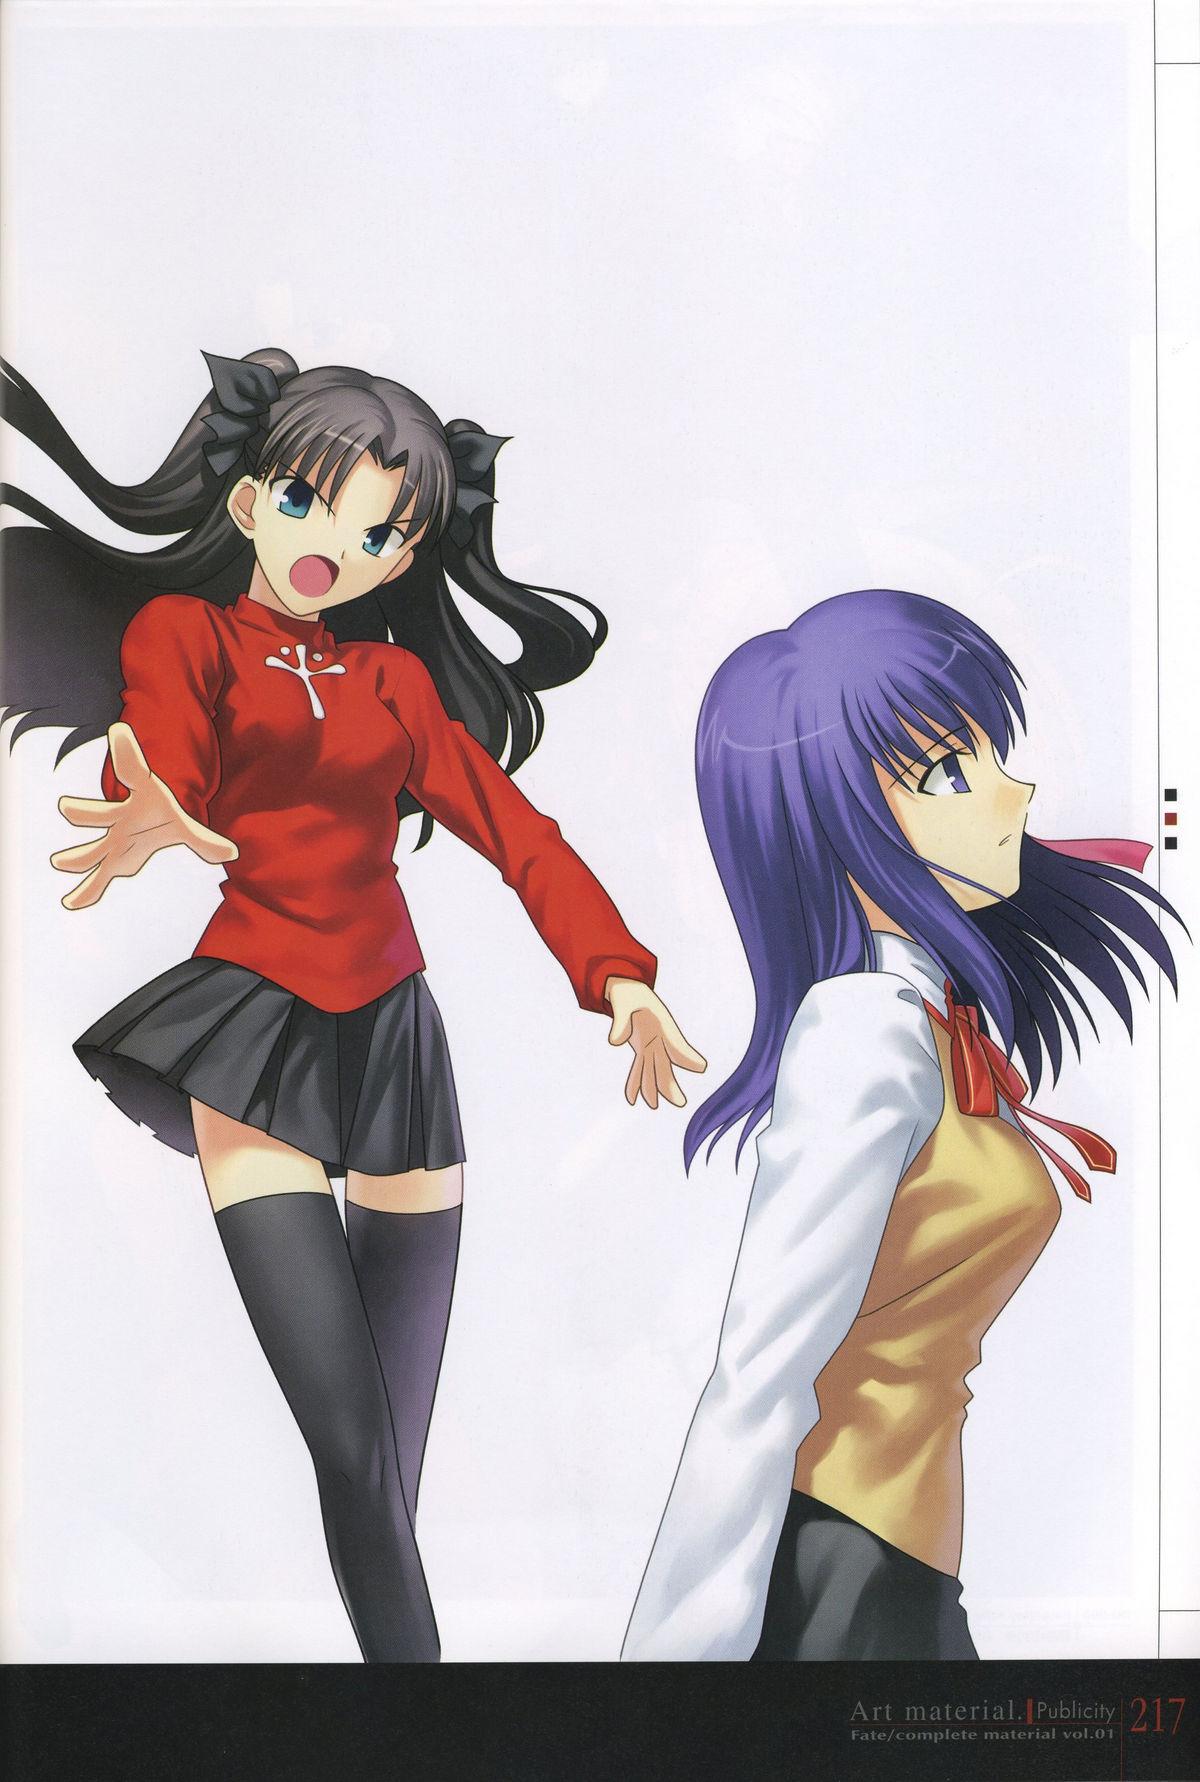 Fate/complete material I - Art material. 221